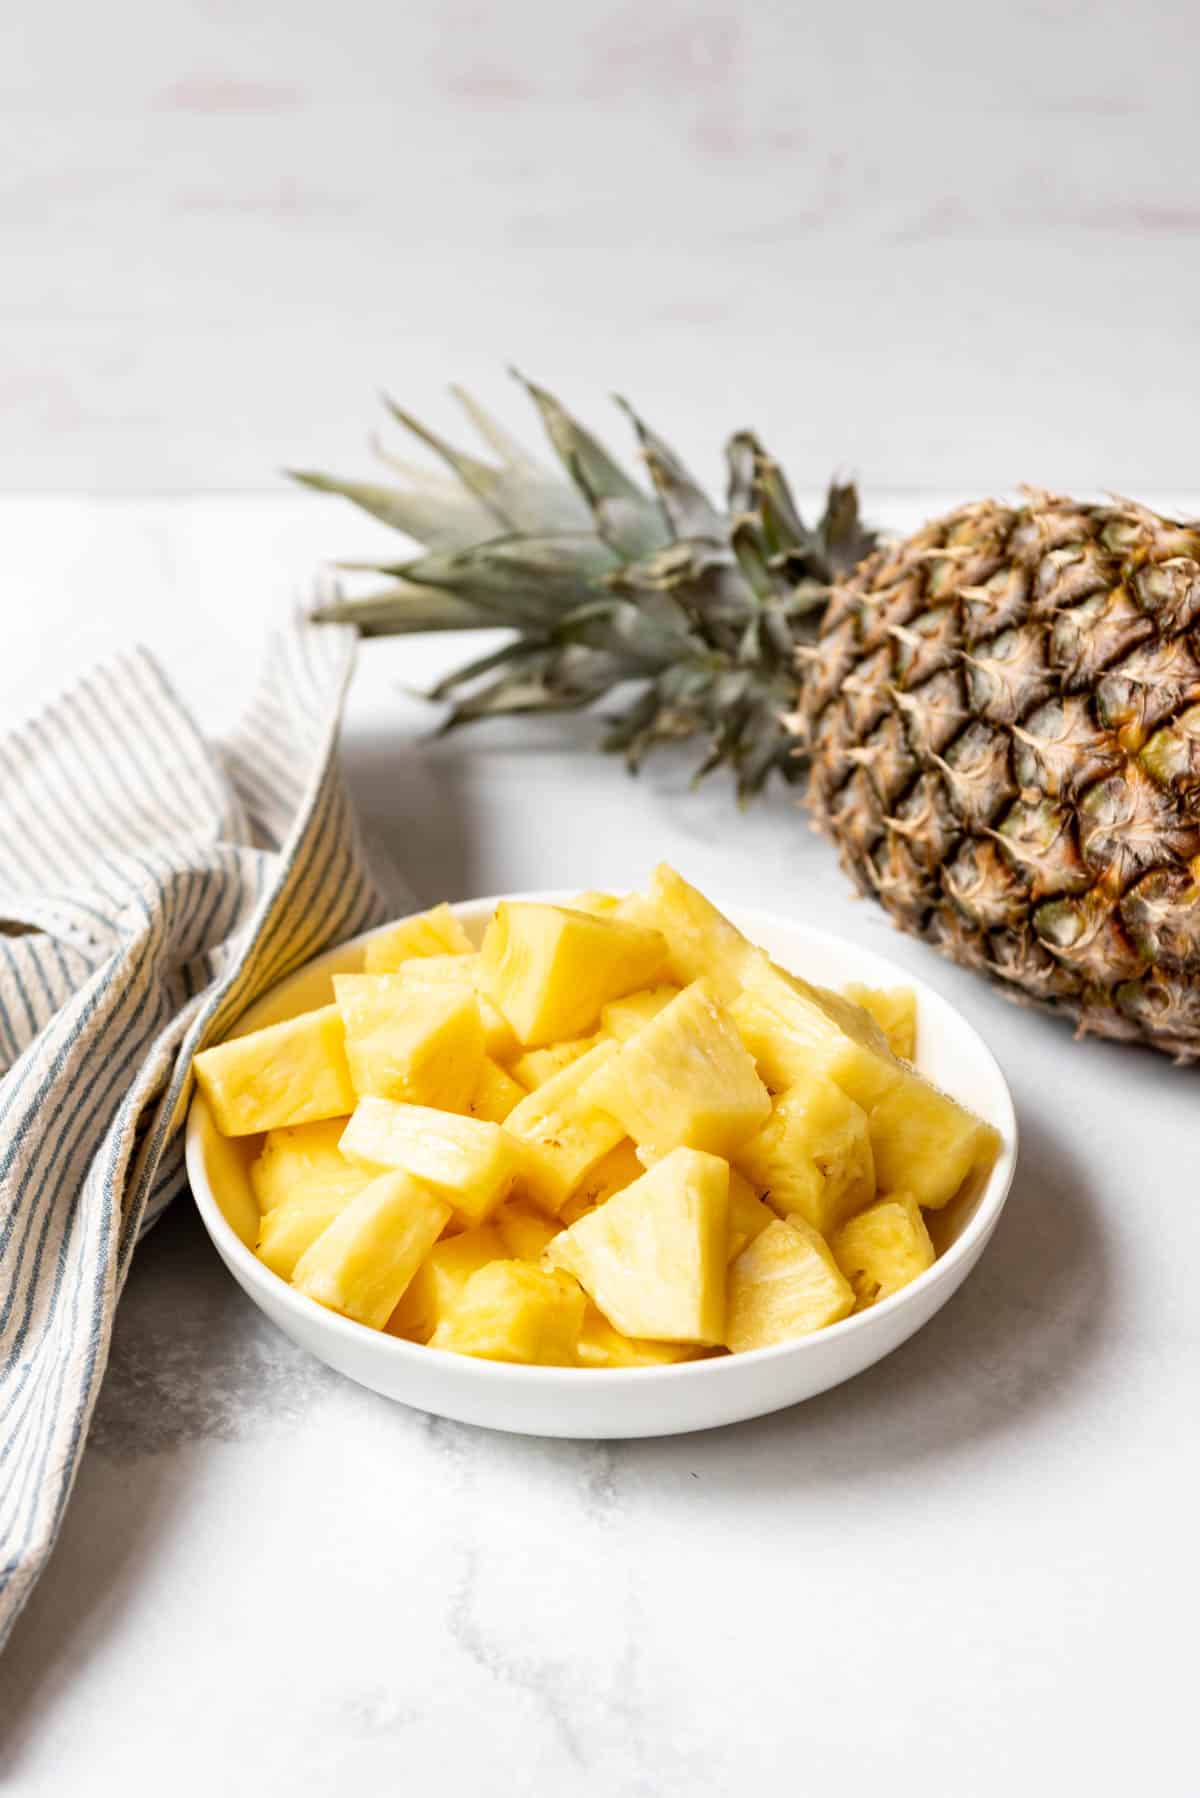 A bowl of fresh pineapple chunks in front of a whole pineapple.